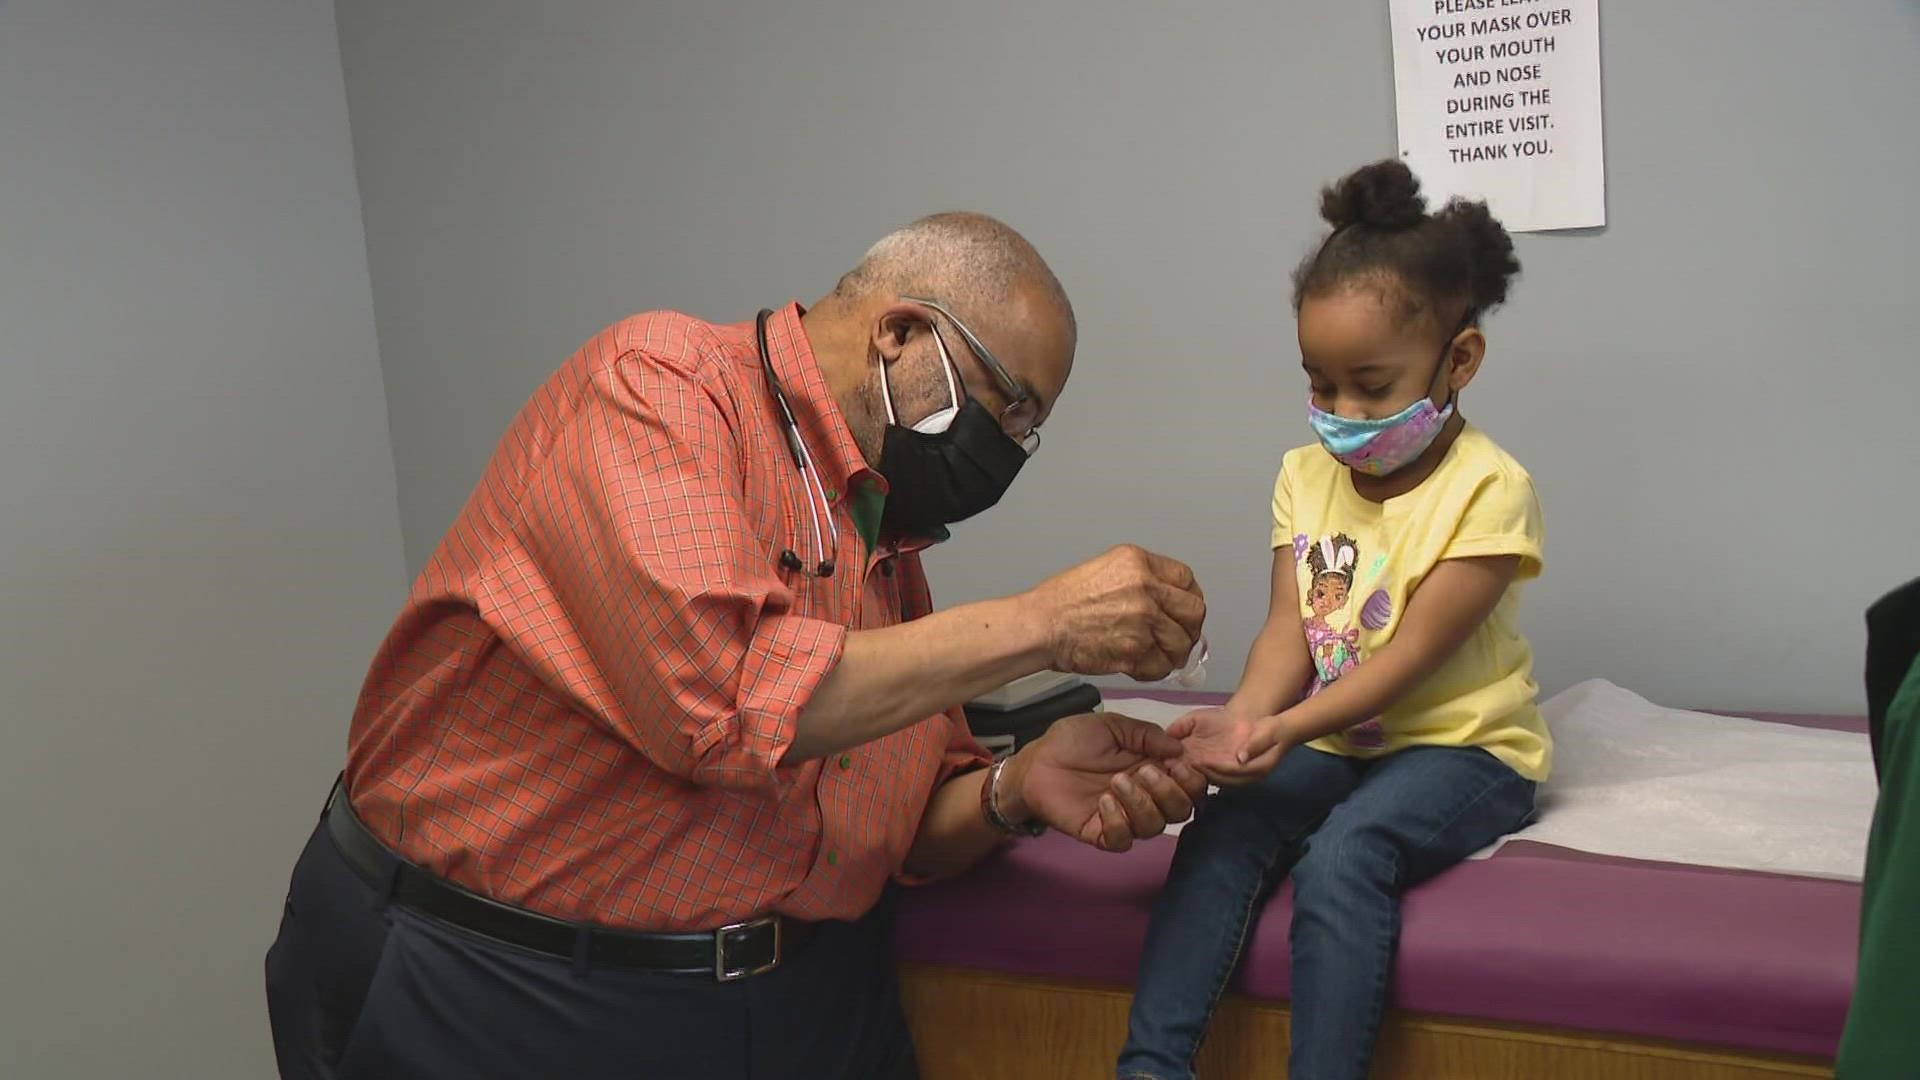 Many parents are still searching to find over-the-counter cold medicines for their sick kids.